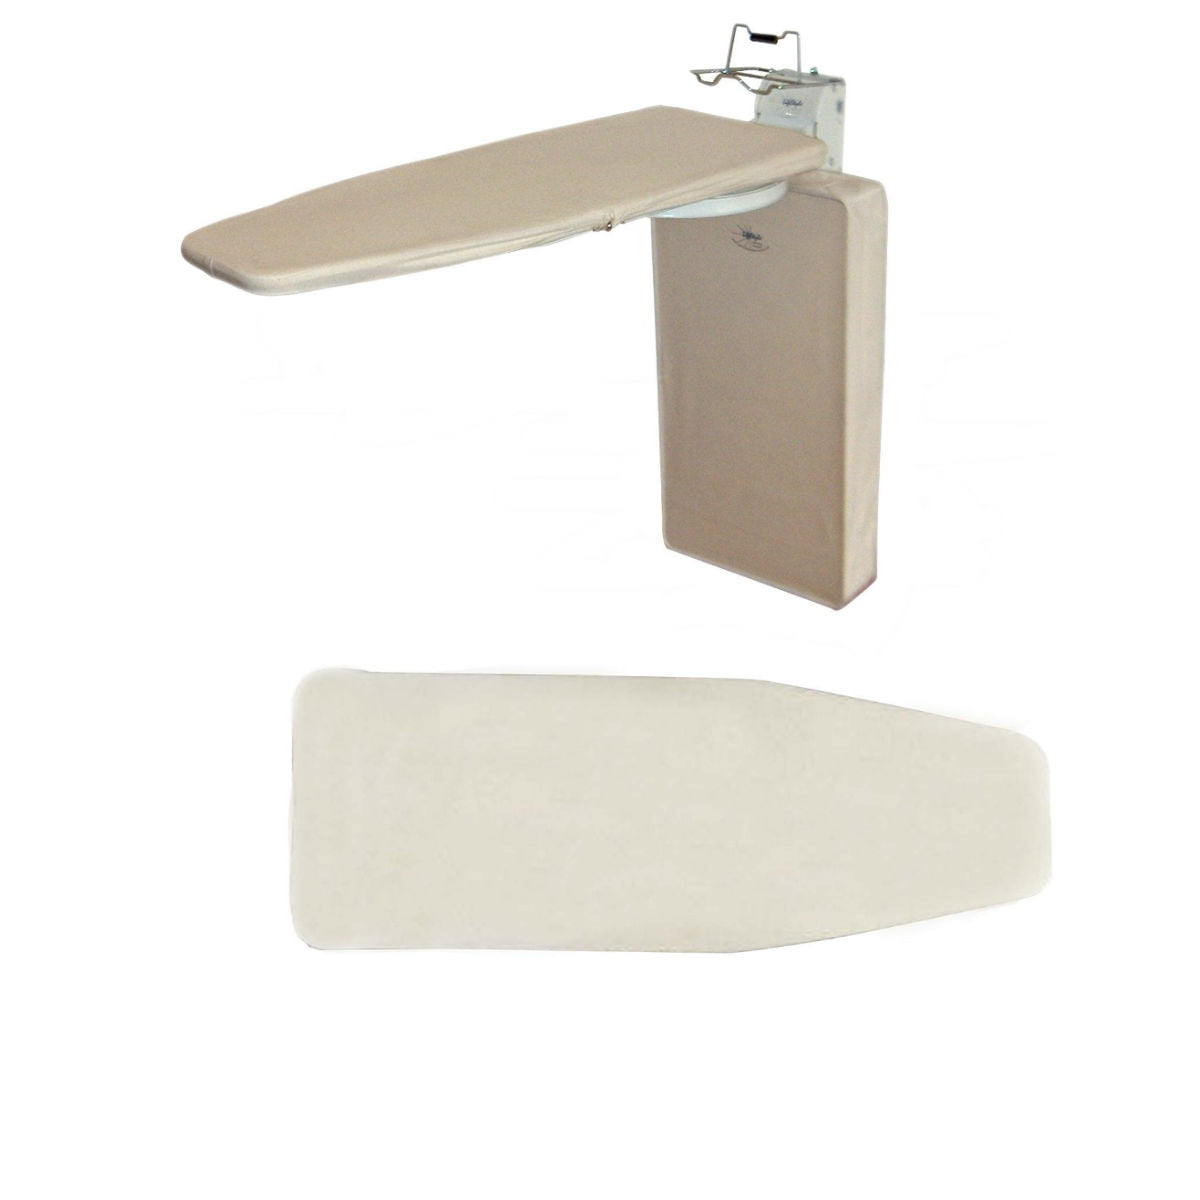 Lifestyle Vertical Size Wall Mounted Ironing Center with Full Size Replacement Ironing Board